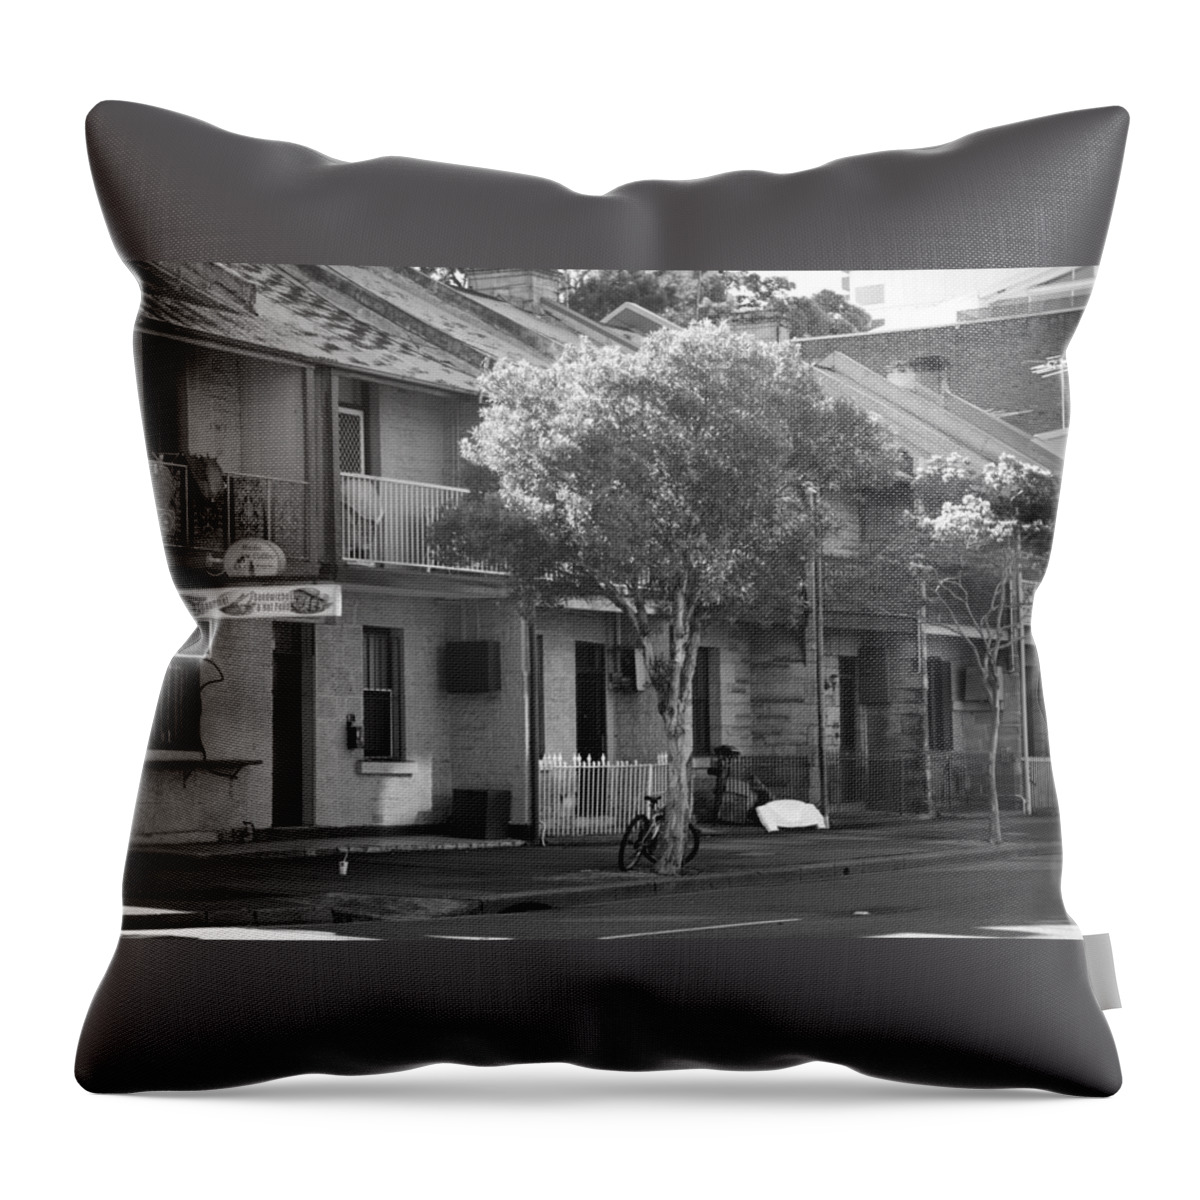 Australia Throw Pillow featuring the photograph Cup With A Straw by Lee Stickels